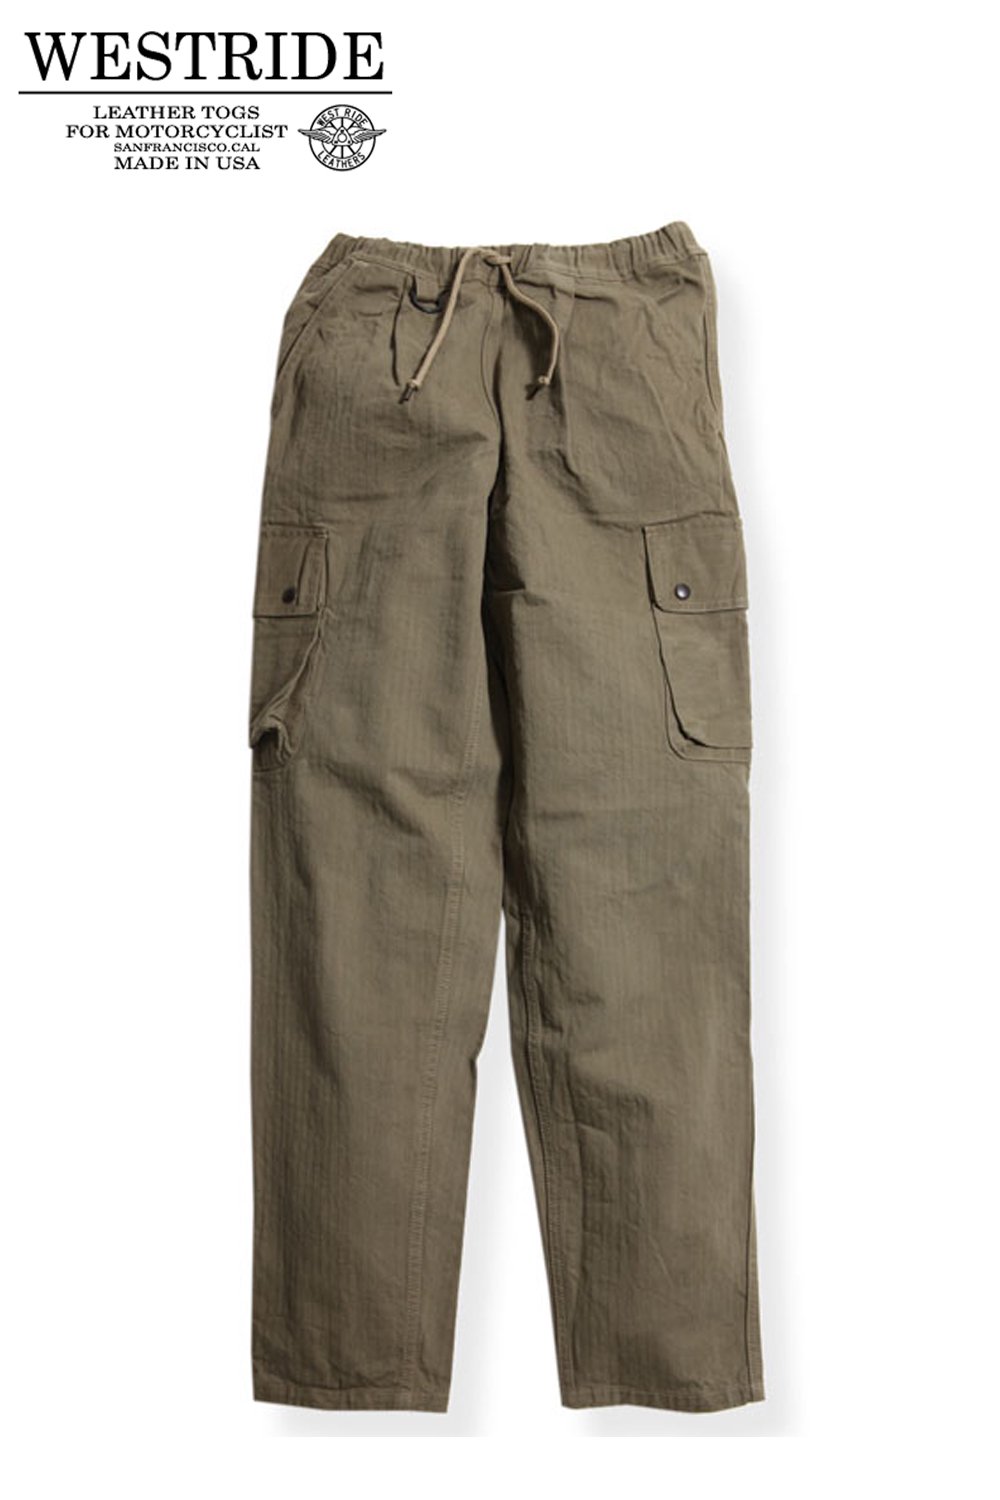 WESTRIDE(ウエストライド) カーゴパンツ CYCLE MOUNTAIN CARGO PANTS MB2013-1 通販正規取扱 |  ハーレムストア公式通販サイト